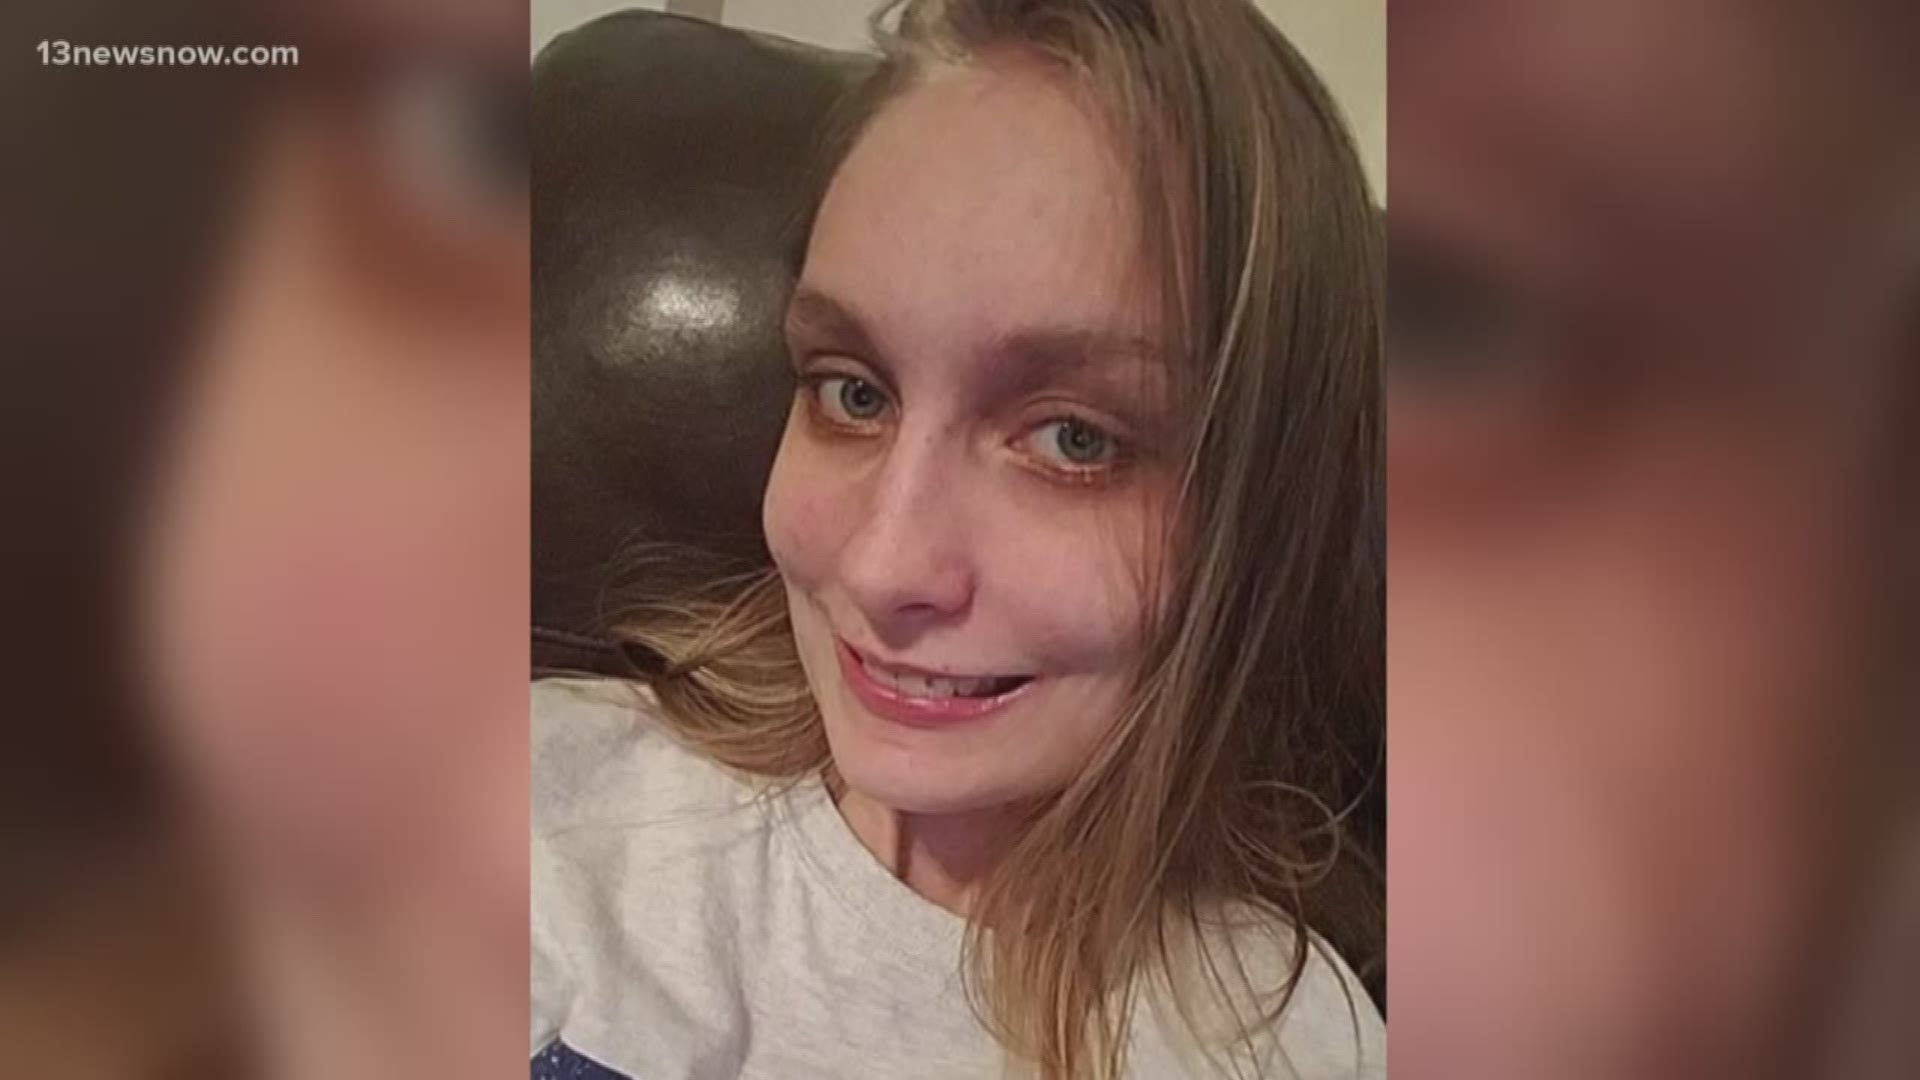 Suffolk police said Lynnelle Martin hasn't been seen since 5:30 p.m. Thursday. She has serious medical conditions that require medicine she doesn't have with her.